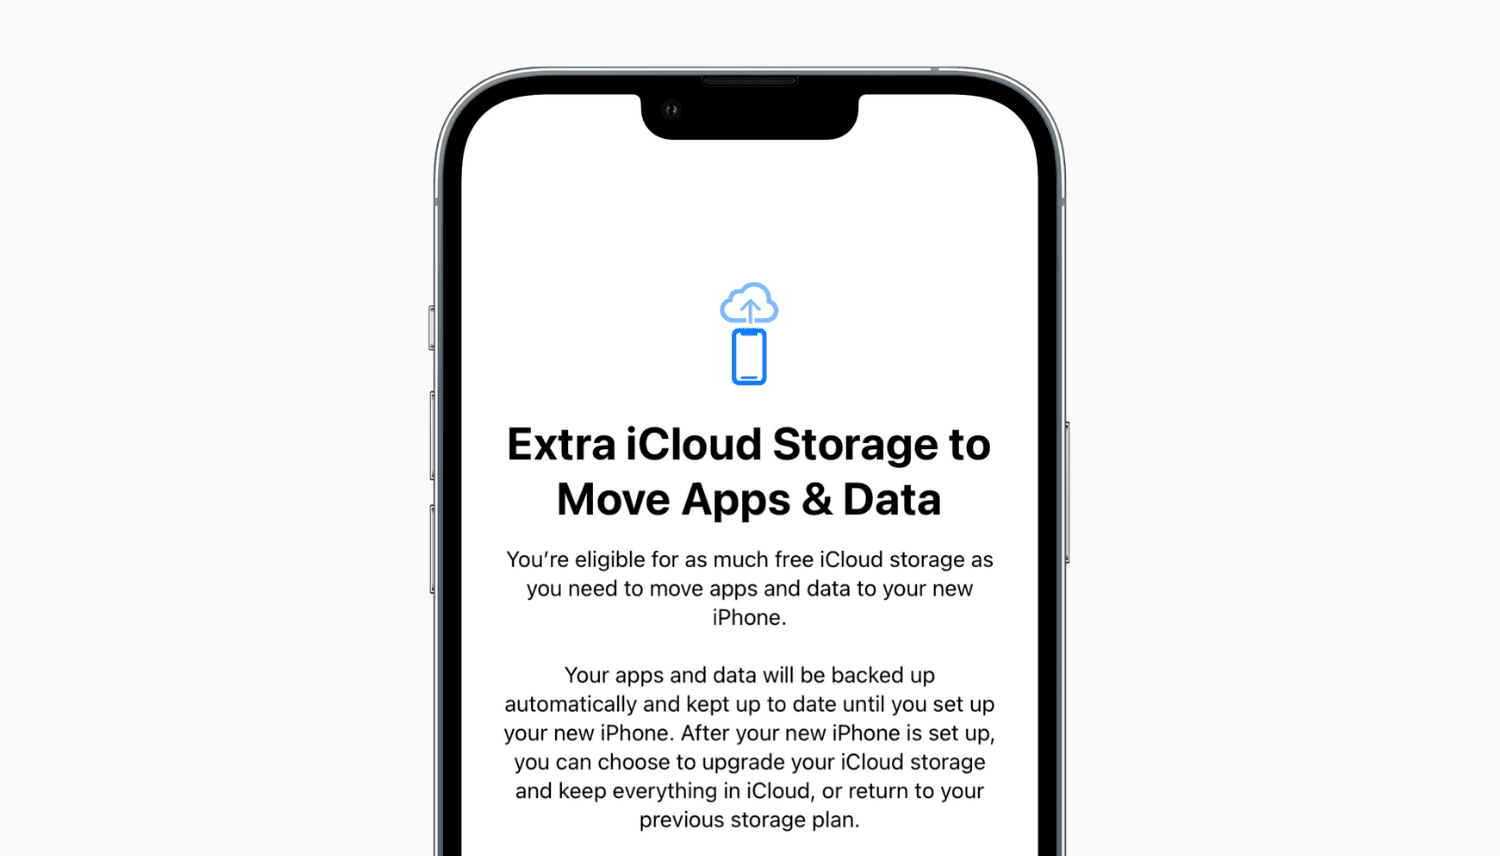 Extra iCloud Storage to Move Apps and Data on iPhone